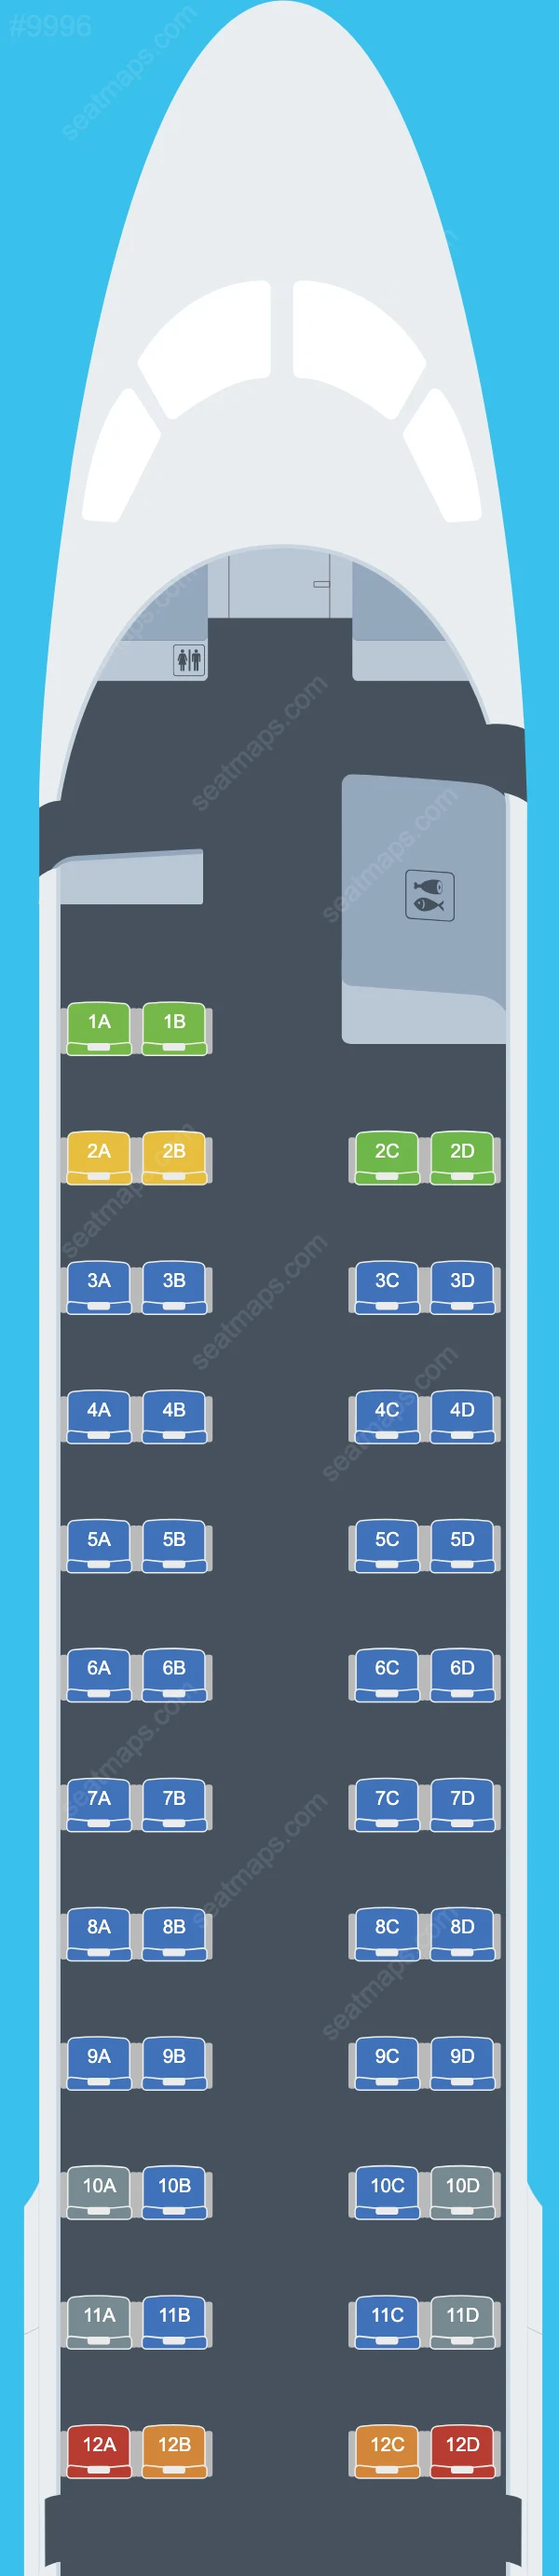 Eastern Airways Embraer E190 seatmap mobile preview